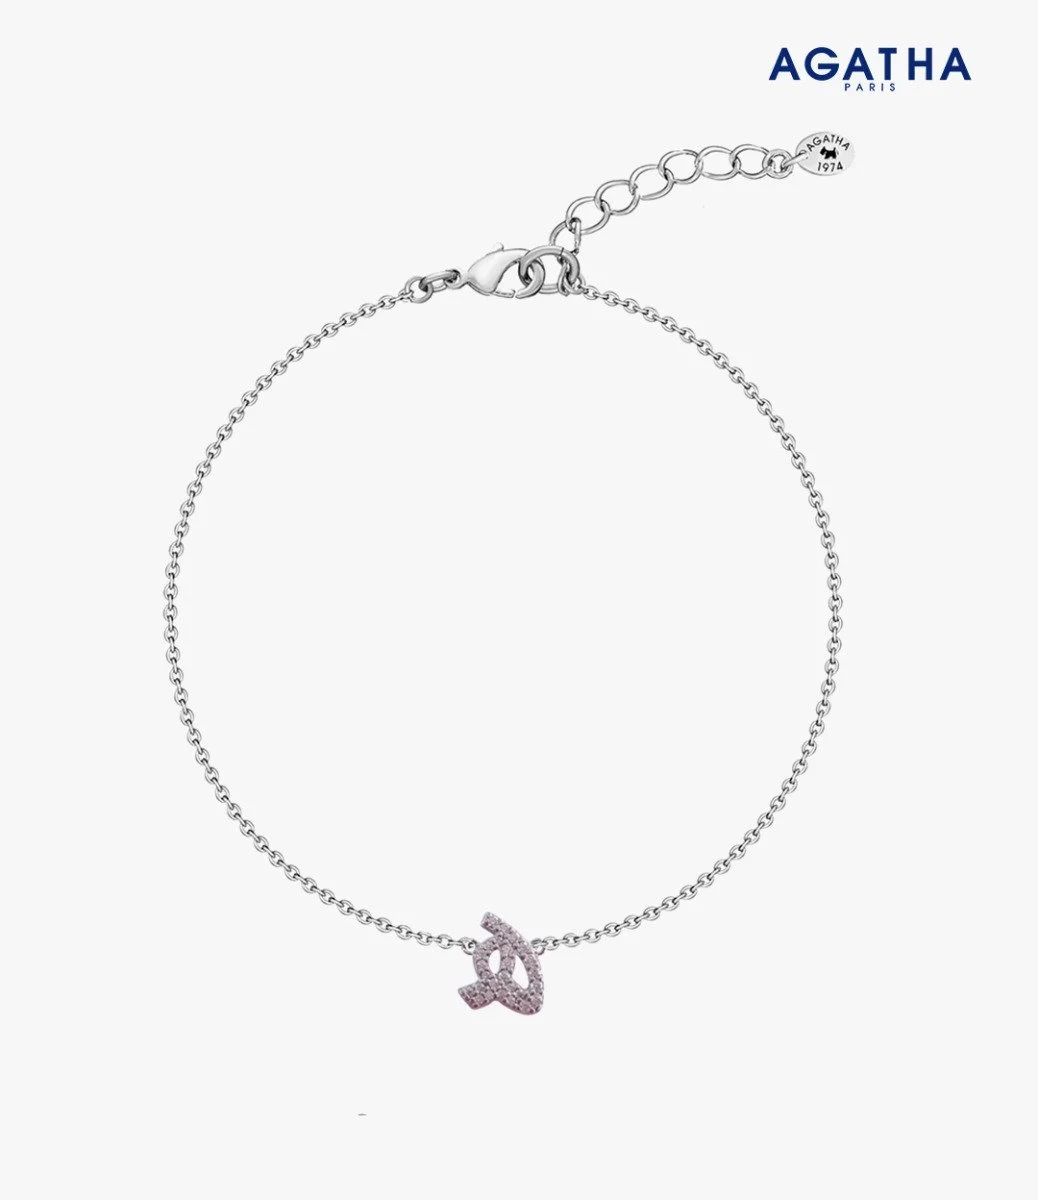 Bracelet With Paved Arabic Letter "Haa" by Agatha Paris